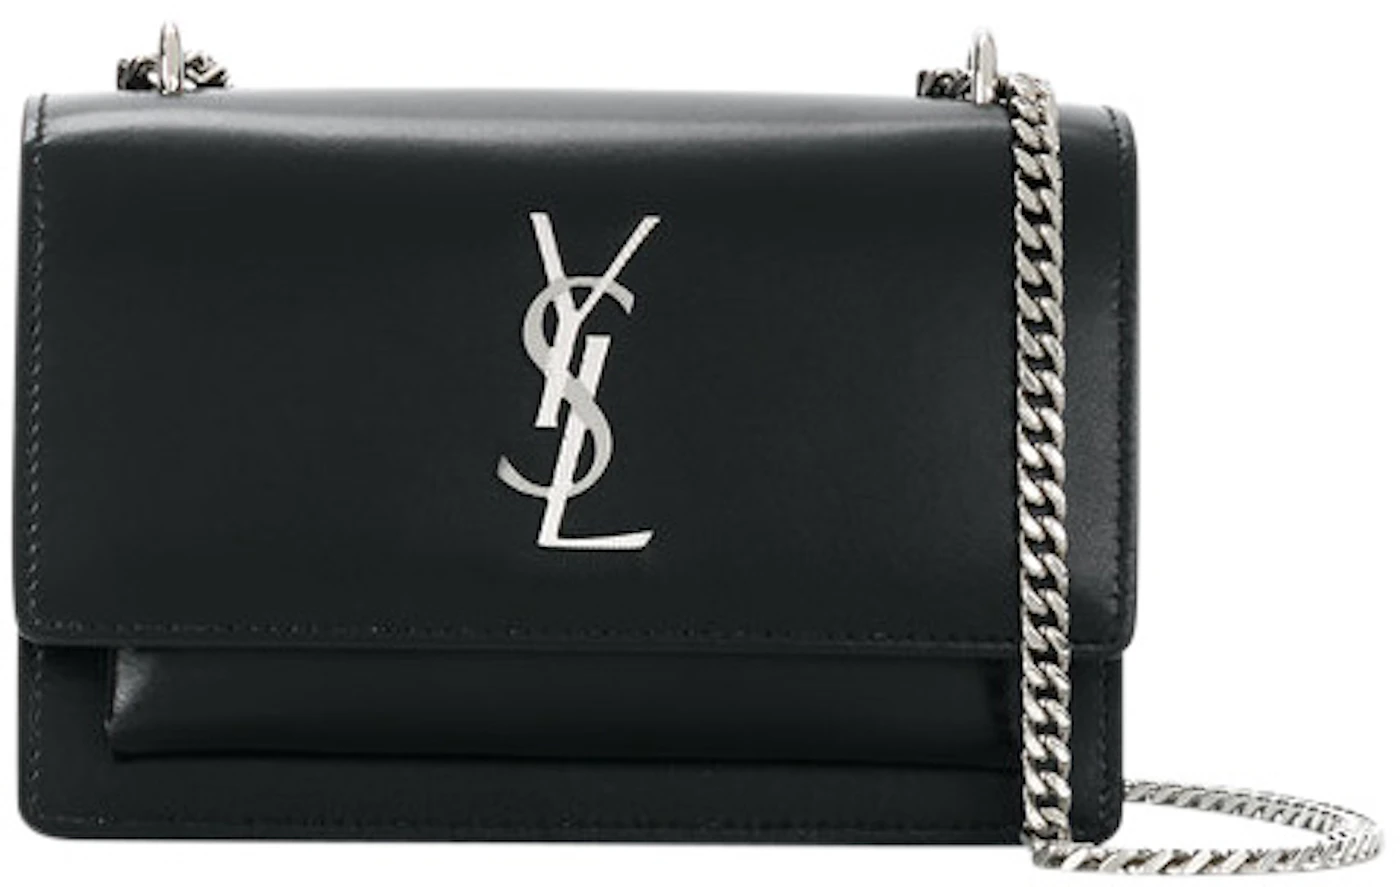 Saint Laurent Bag Reviews - Sunset, Cassandra, Mini Lou  Ysl sunset, Ysl  wallet on chain, Ysl wallet on chain outfit